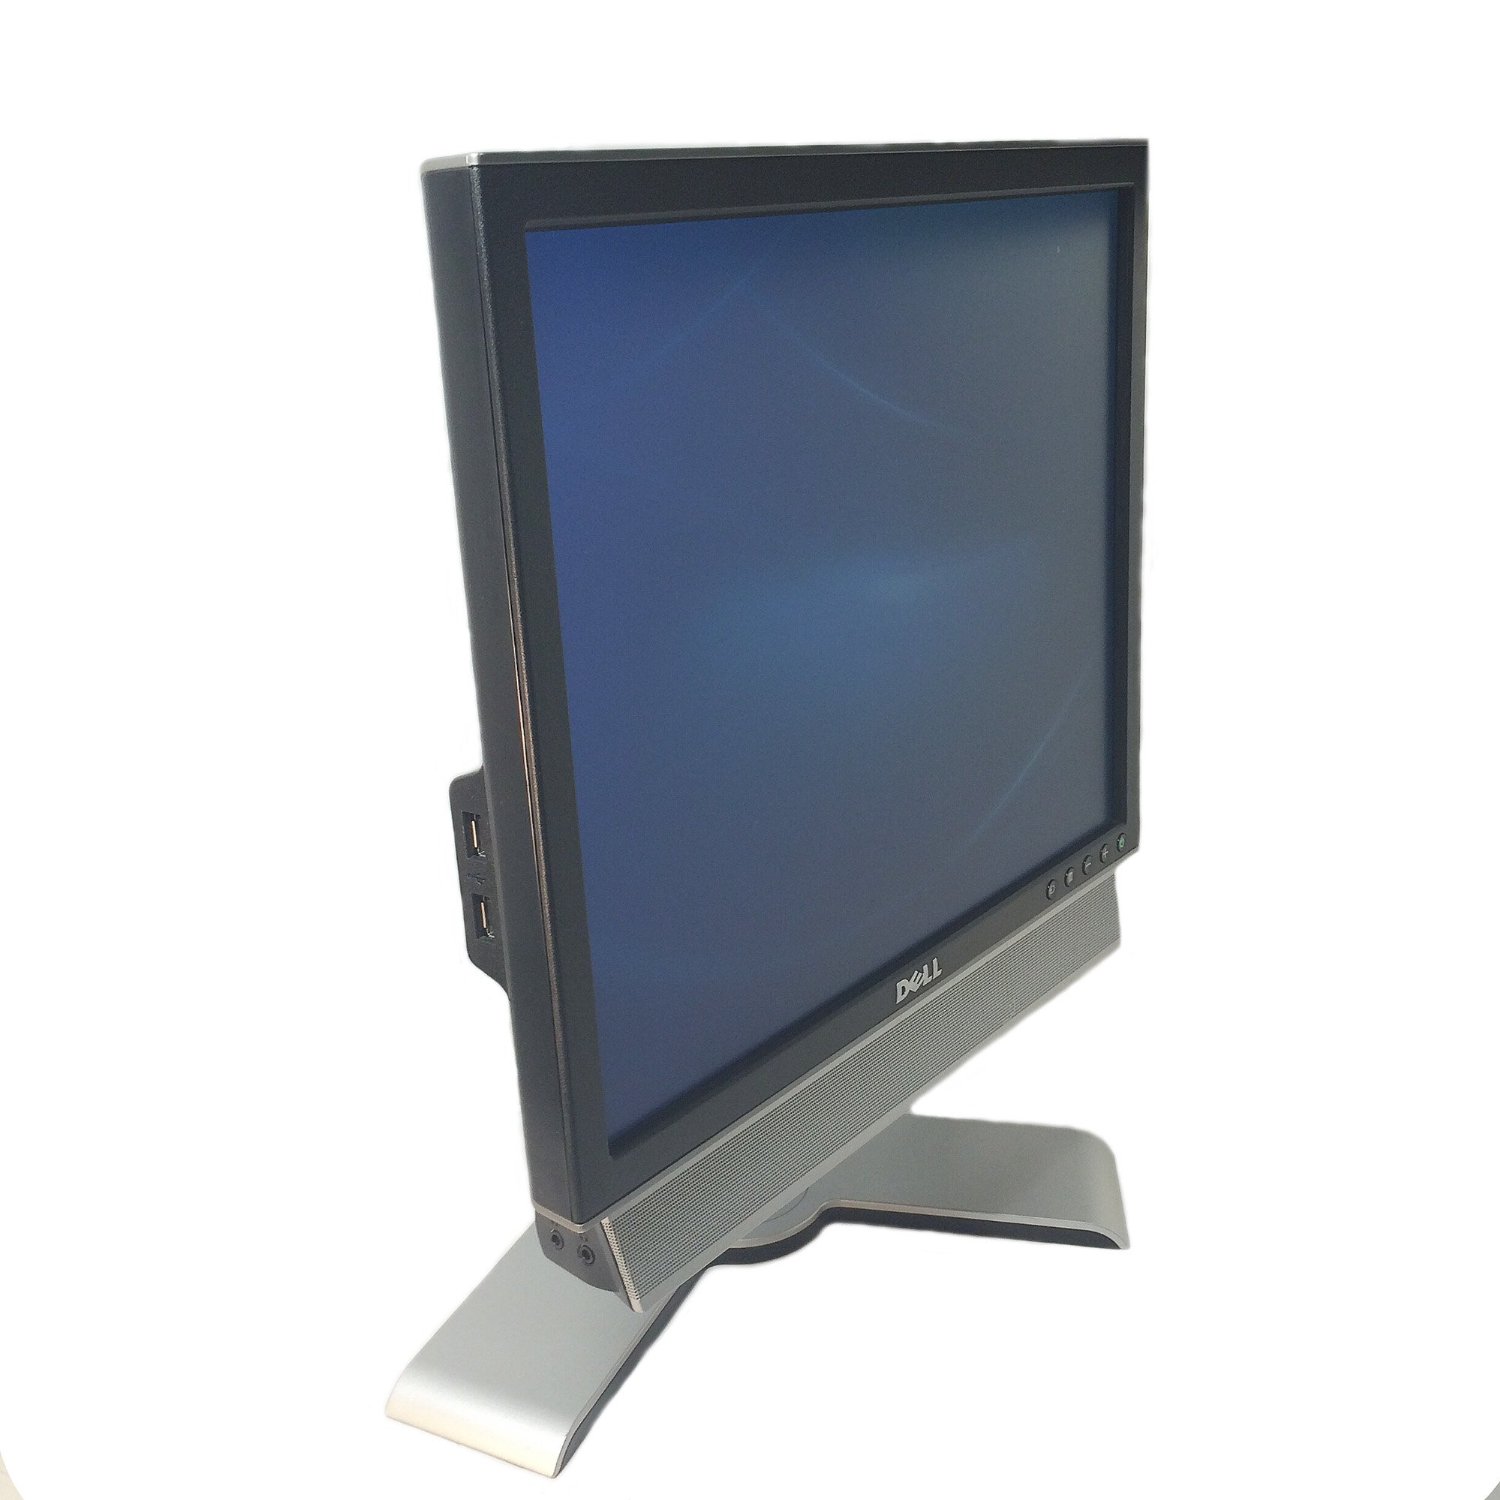 Dell 1707FP 17-Inch LCD Monitor